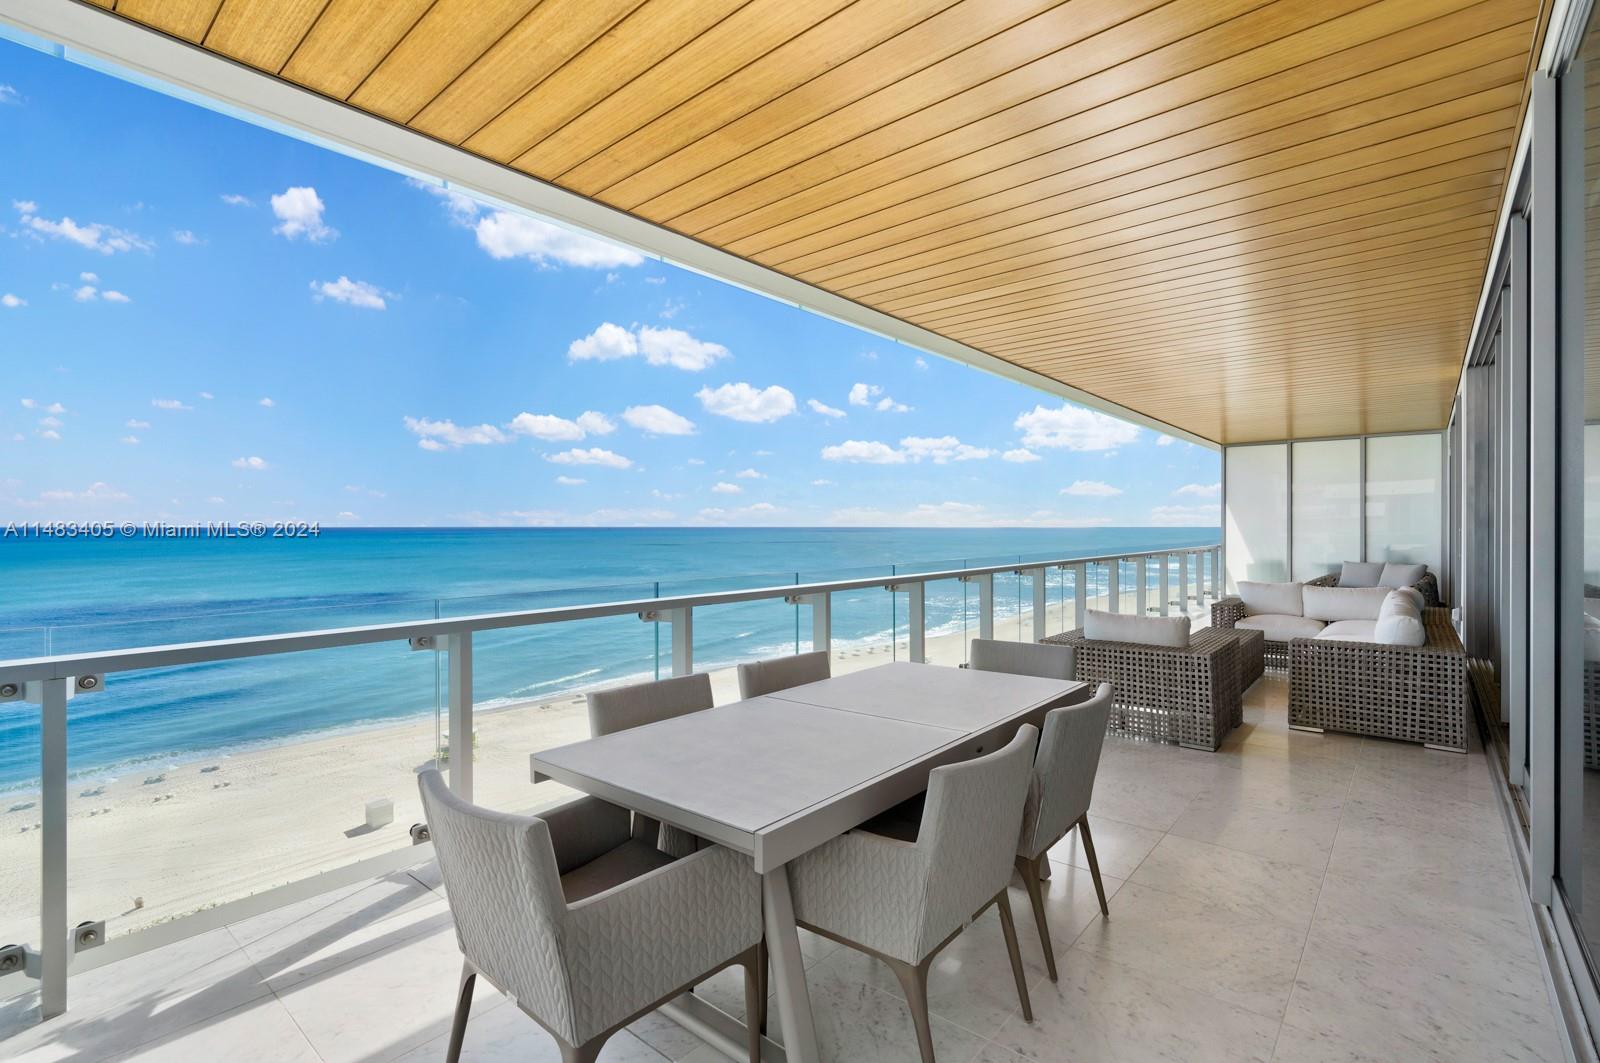 This exclusive oceanfront residence is perched along Millionaire&#039;s Row, offering a view of Miami Beach&#039;s most beautiful and sought-after stretch of beachfront. 57 Ocean comprises 70 luxury residences with floor-to-ceiling windows, spacious 12ft deep terraces &amp; private elevator foyers. Unit 1203 is a haven of elegance &amp; sophistication, collaboratively designed by Debbie Kalimian &amp; Stephanie Cohen. Herringbone wood flooring throughout &amp; custom Poliform closets grace the bathrooms, kitchen &amp; pantry. Bathrooms are outfitted with luxurious Axor fixtures and kitchen is complete with SubZero &amp; Wolf appliances. The unit is equipped with a SAVANT smart home system.  This flow-through design spans the entire NE corner, offering breathtaking ocean-to-intracoastal views, redefining luxury living.